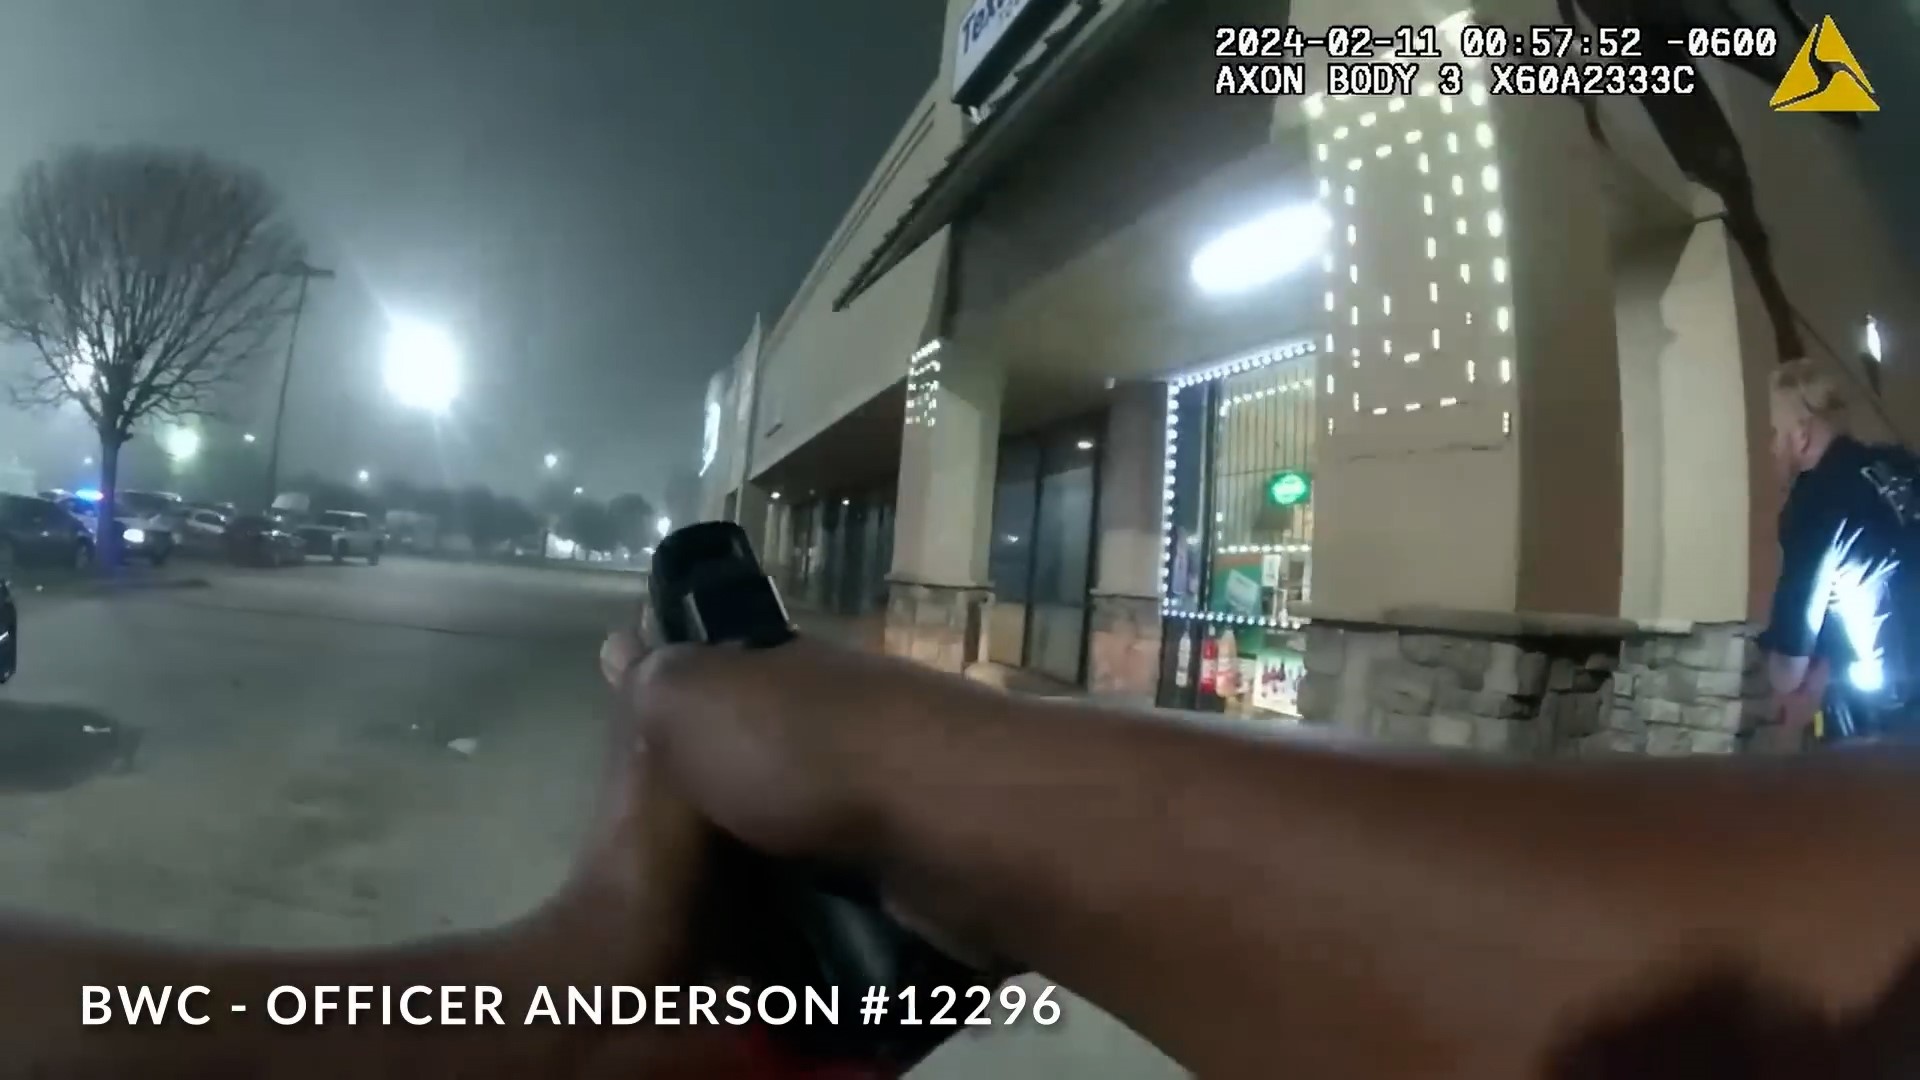 This is the full video edited and provided by the Dallas Police Department.